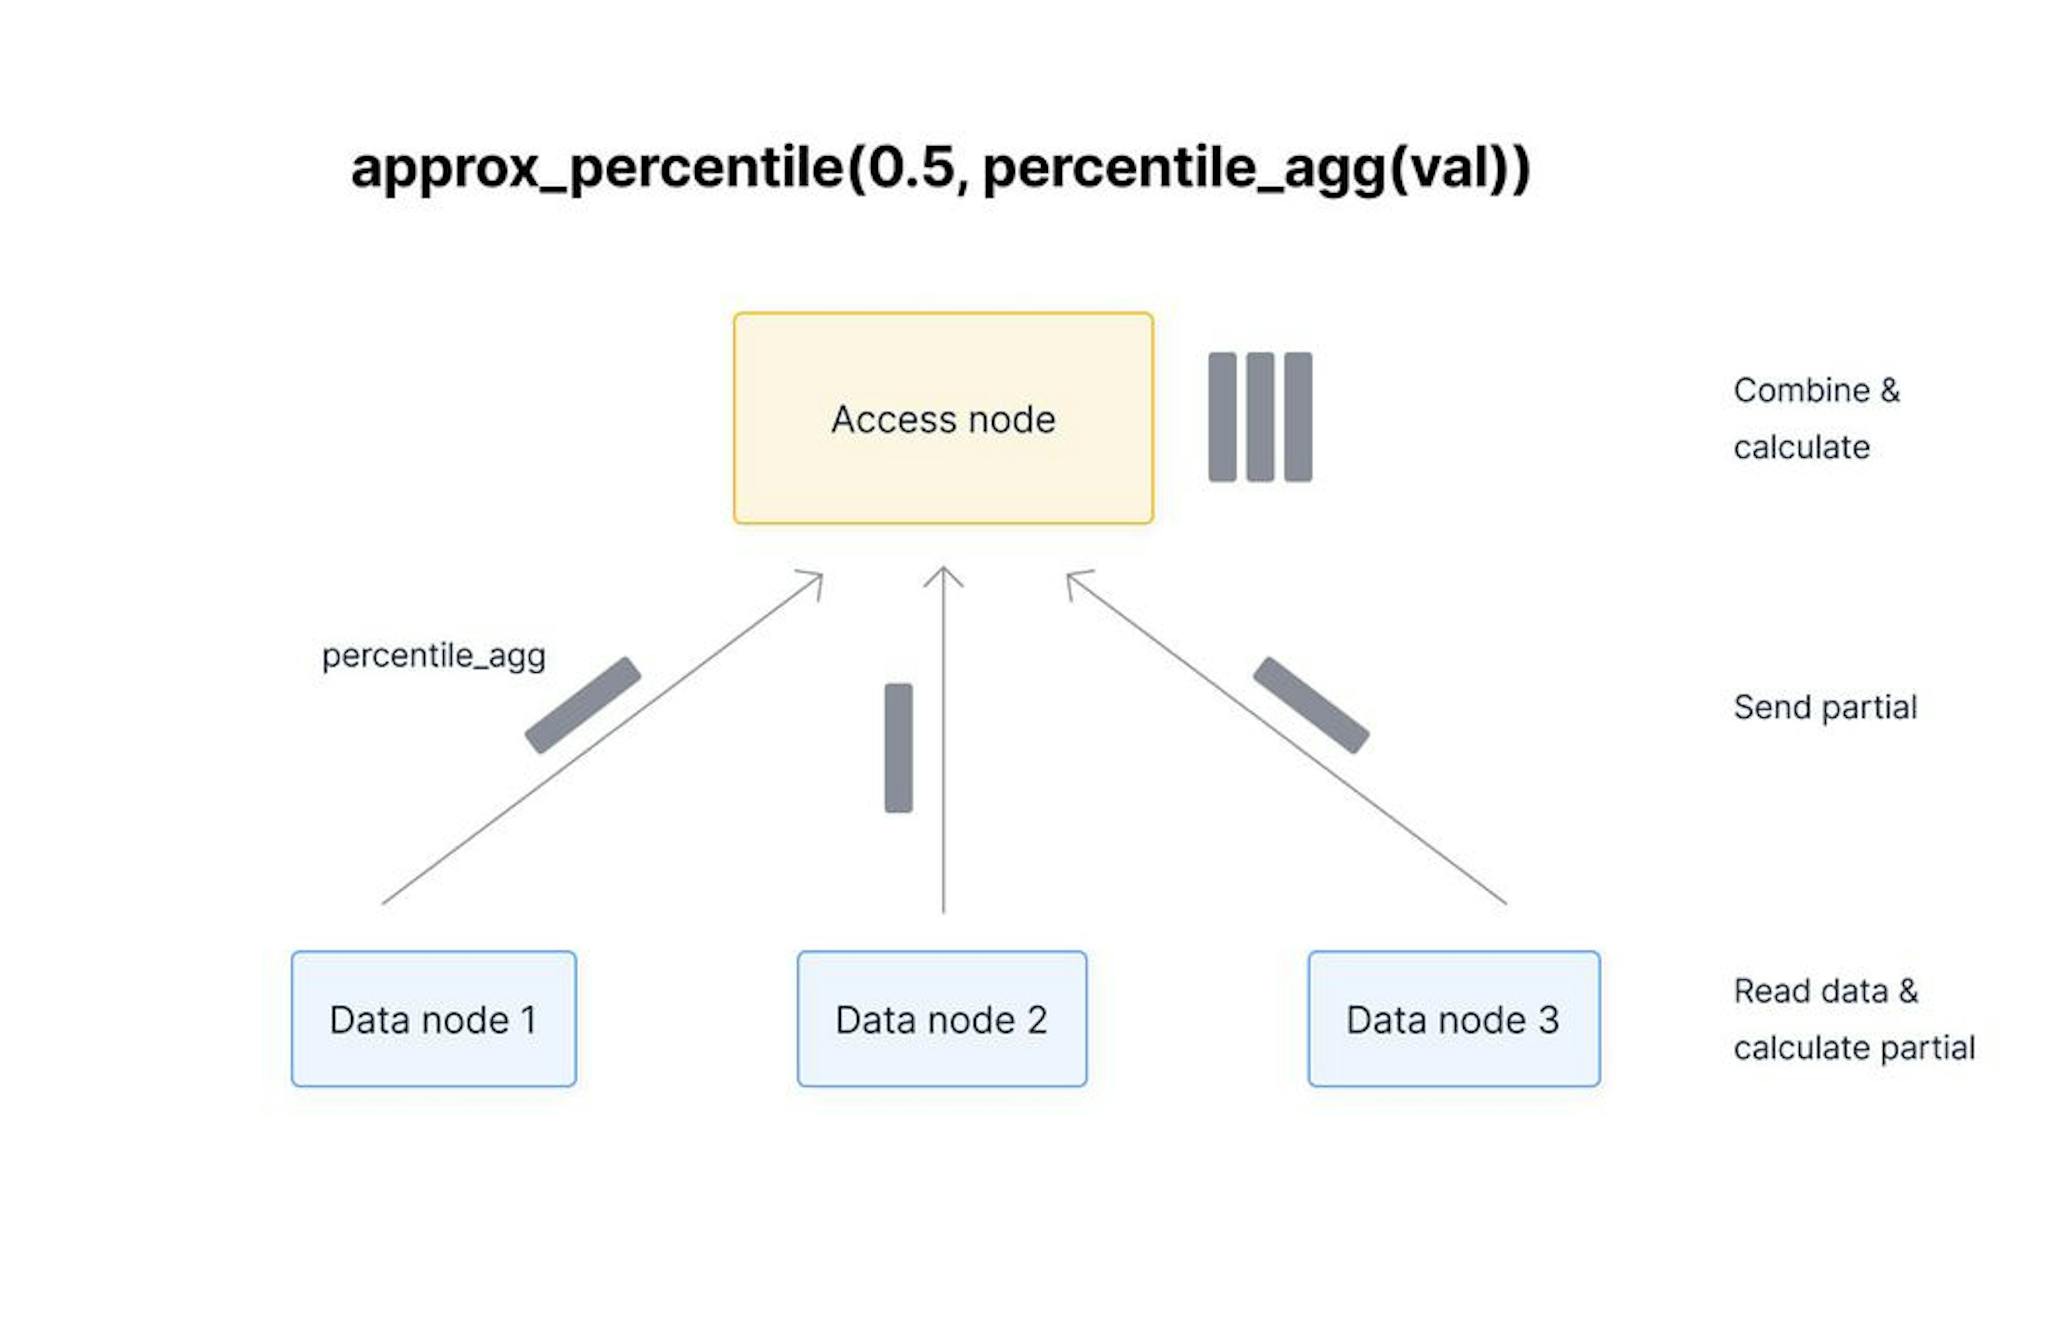 Using our percentile approximation hyperfunctions, the data nodes no longer have to send all of the data back to the access node. Instead, they calculate a partial approximation and send them back to the access node, which then combines the partials and produces a result. This saves a lot of time on network calls since it parallelizes the computation over the data nodes, rather than performing much of the work on the access node. 